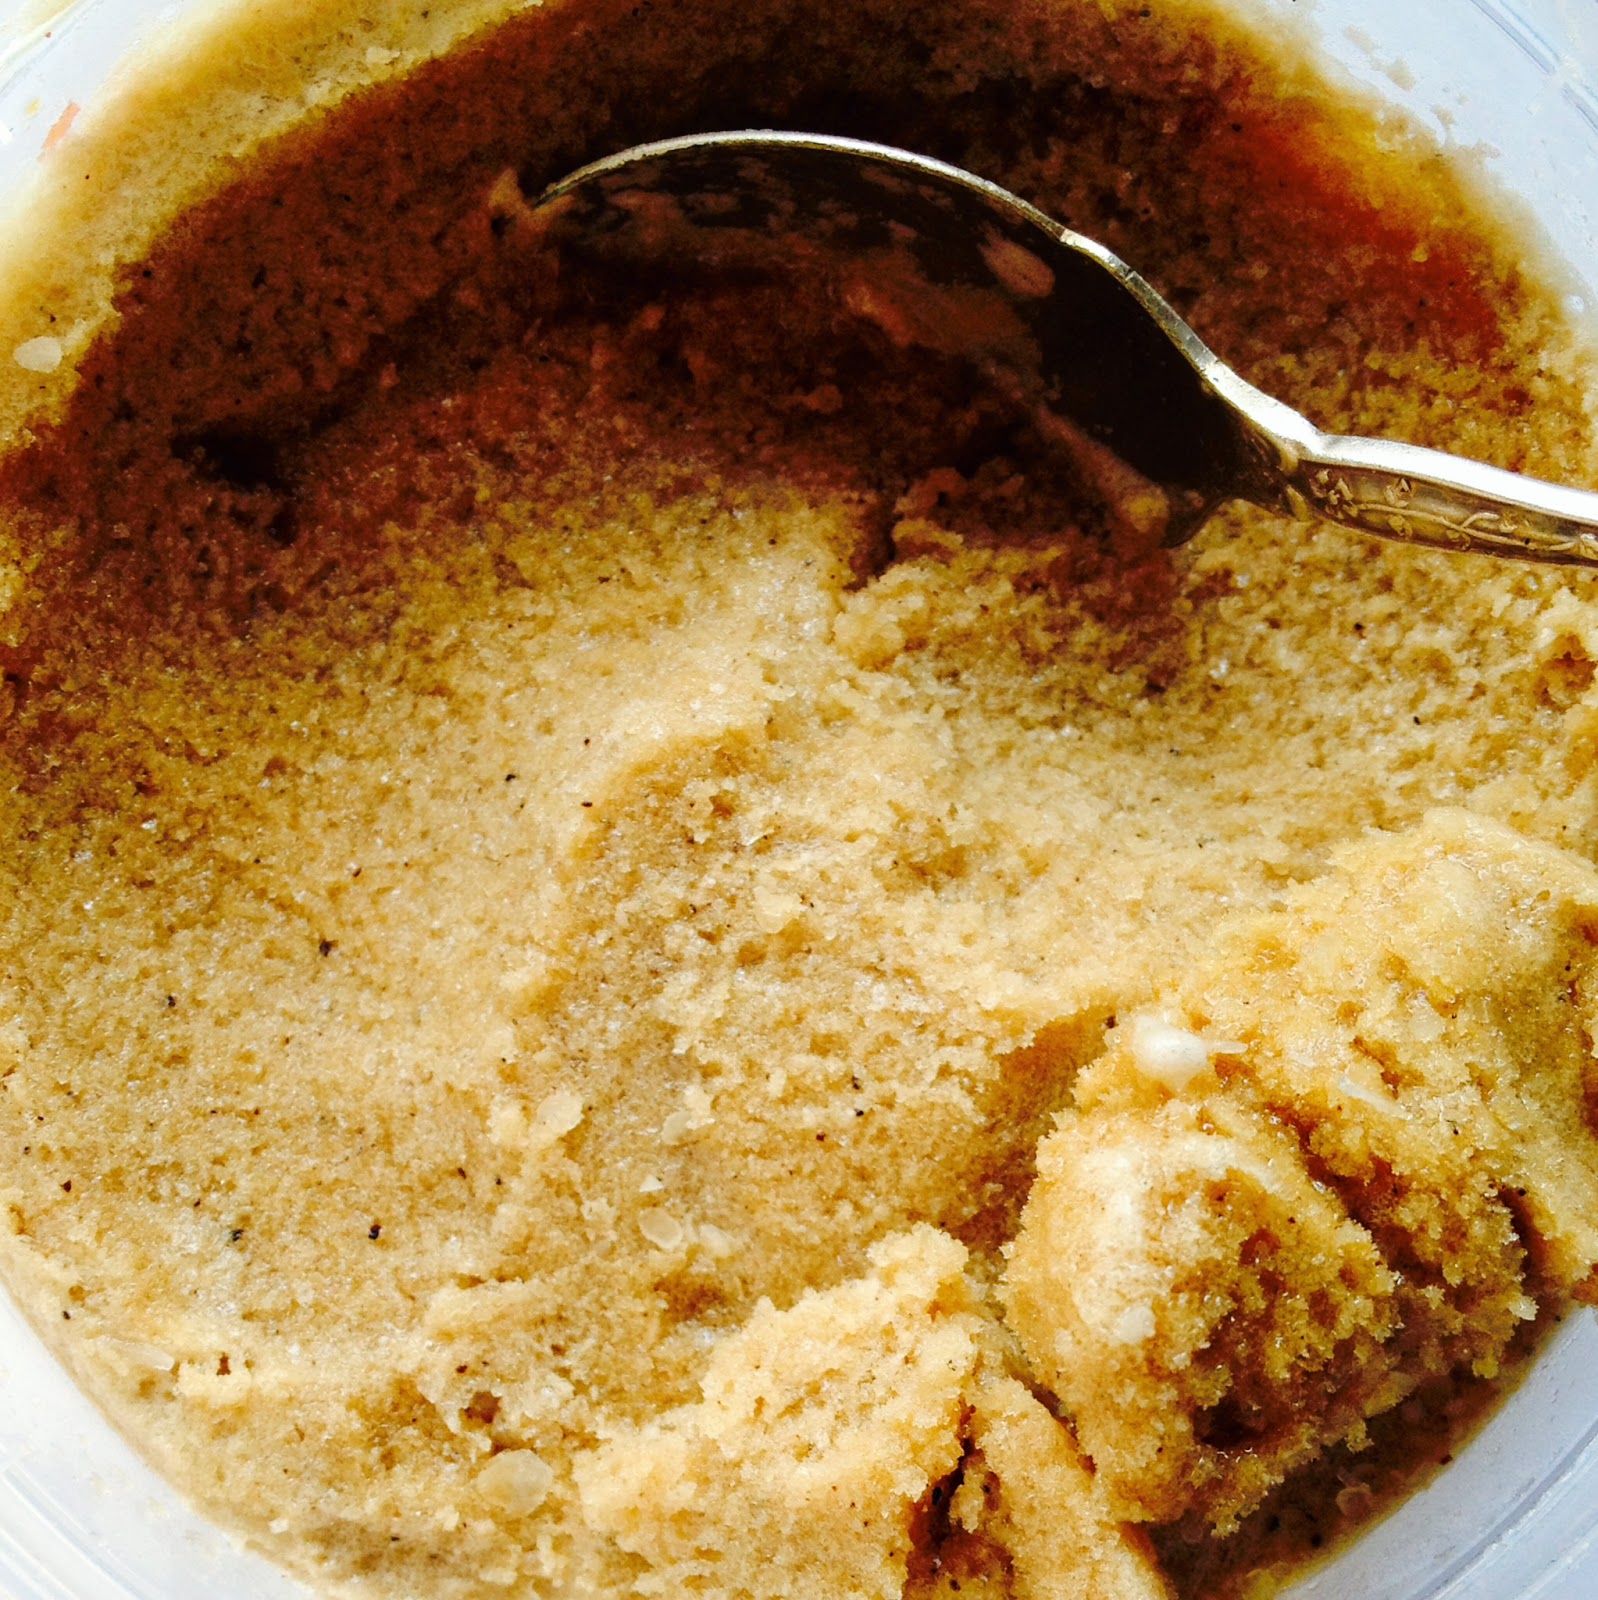 How To Make Coffee Sorbet Recipe/Image: Lucy Corry/The Kitchenmaid